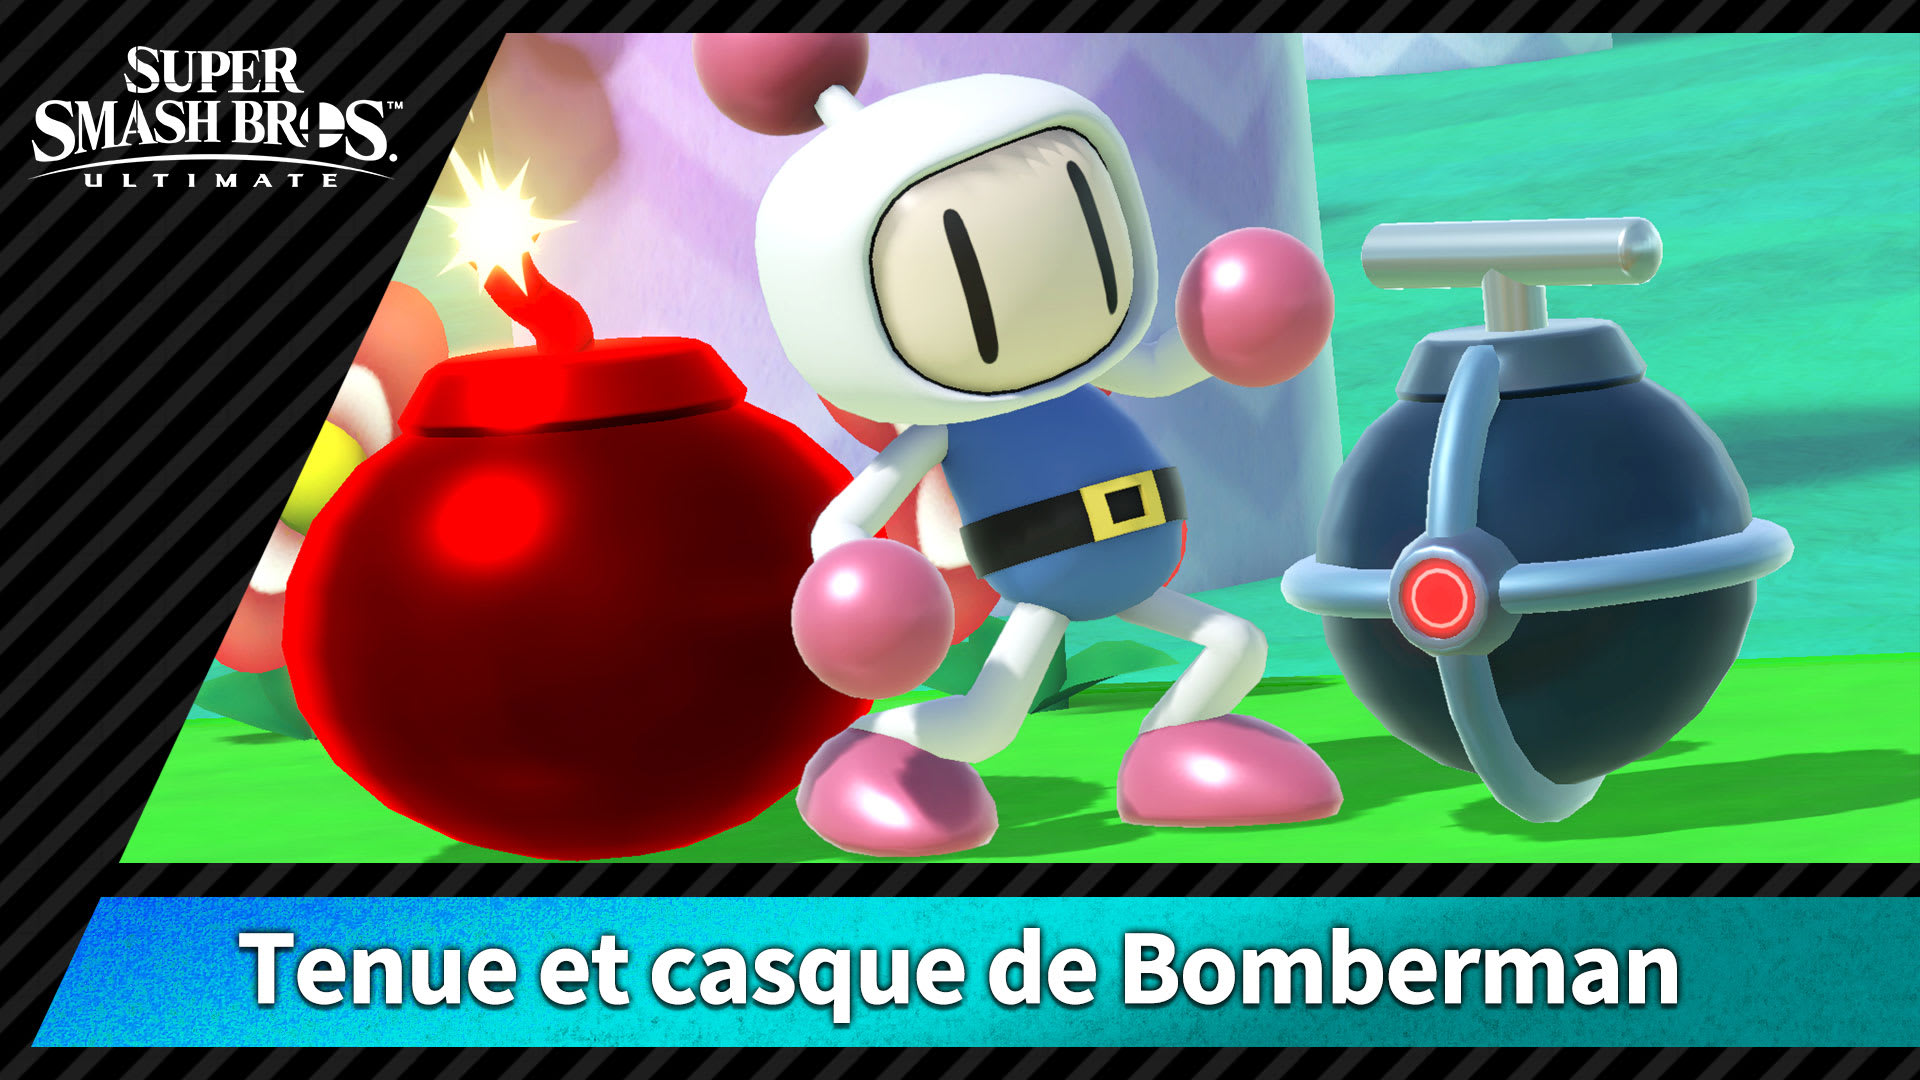 【Costume】Bomberman Outfit and Mask